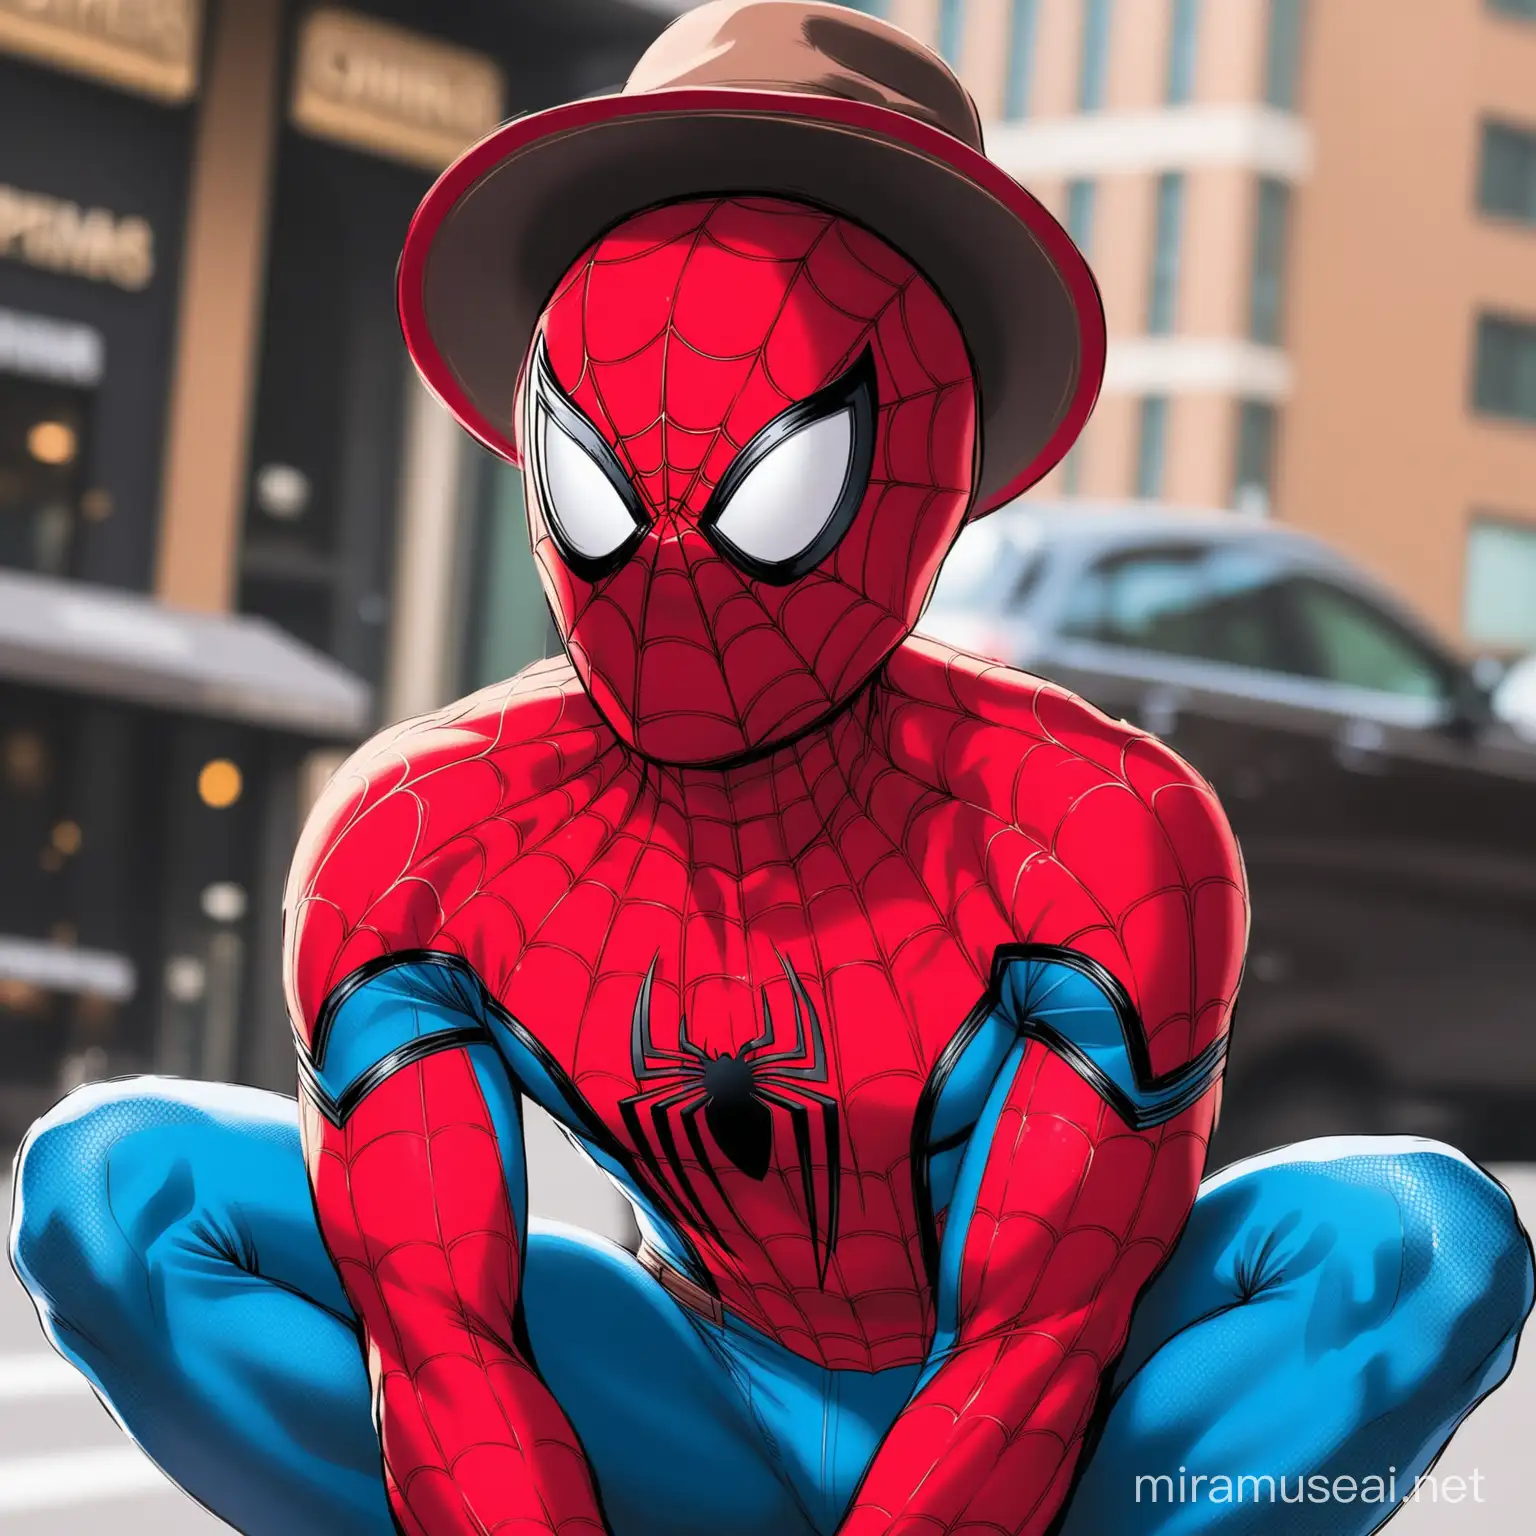 Spiderman Wearing a Top Hat